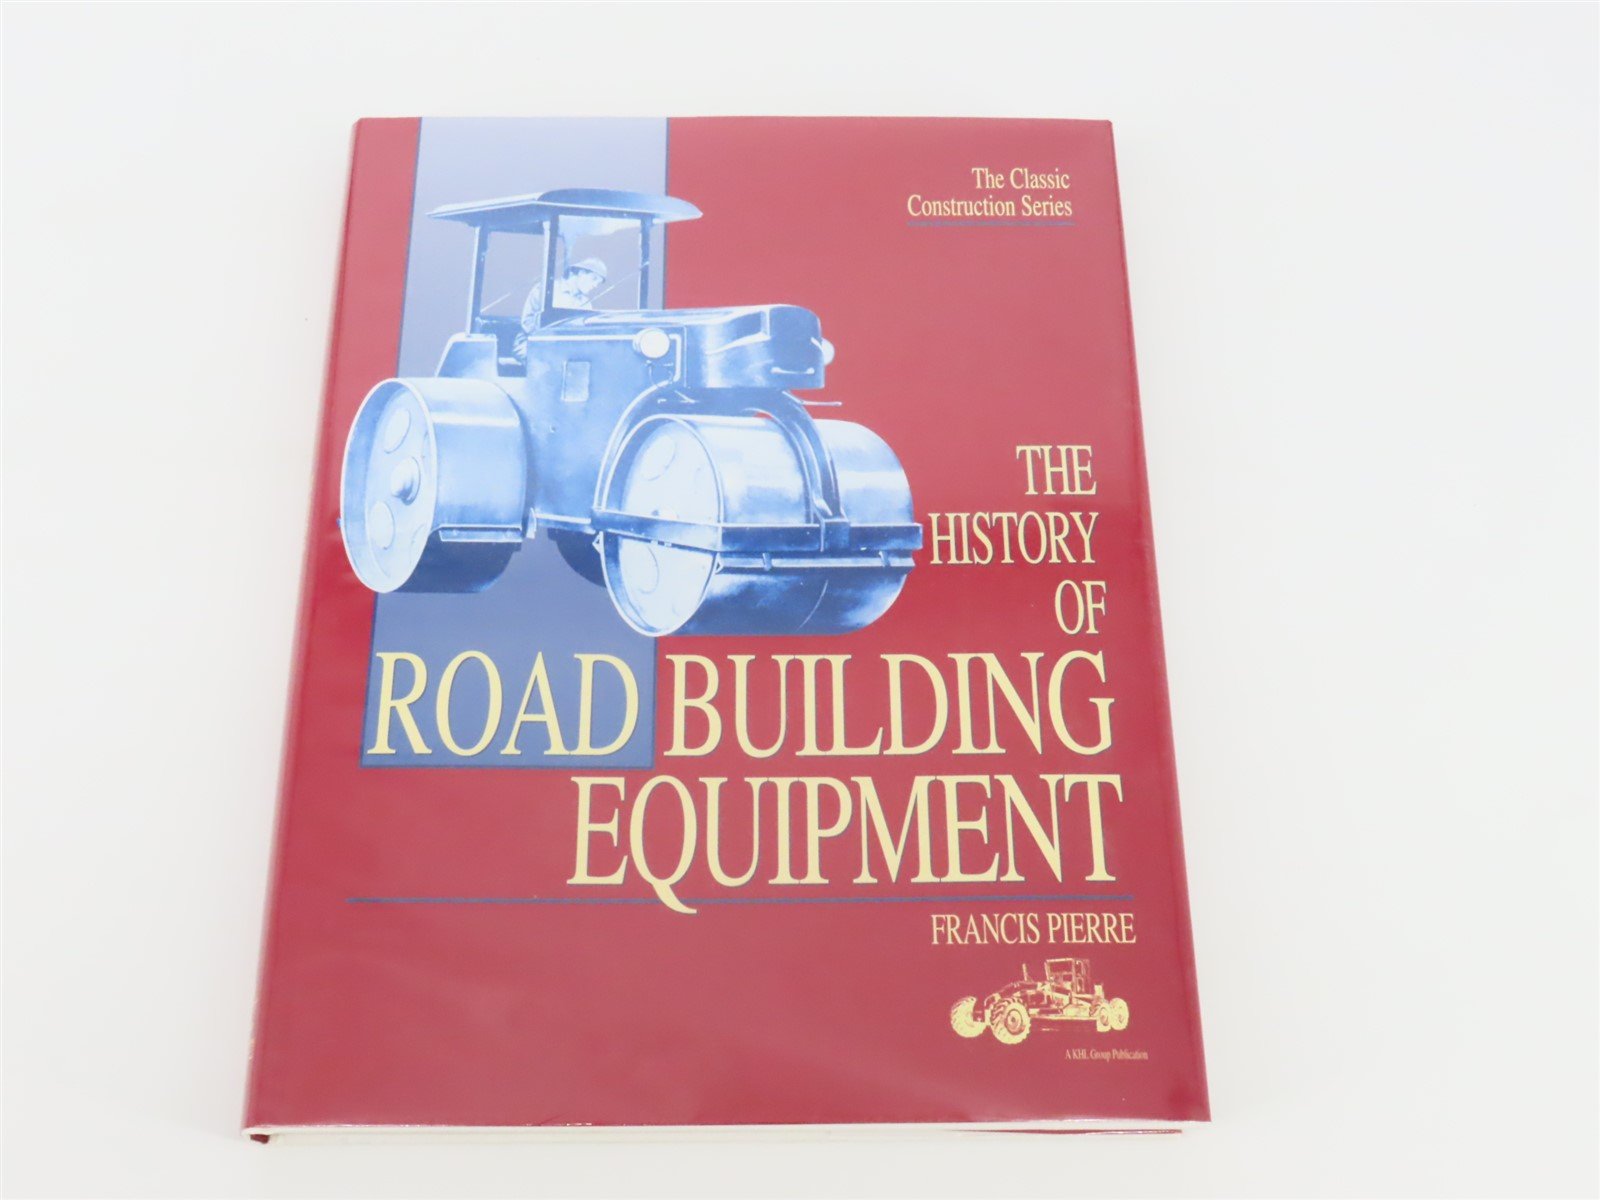 The History Of Road Building Equipment by Francis Pierre ©1998 HC Book